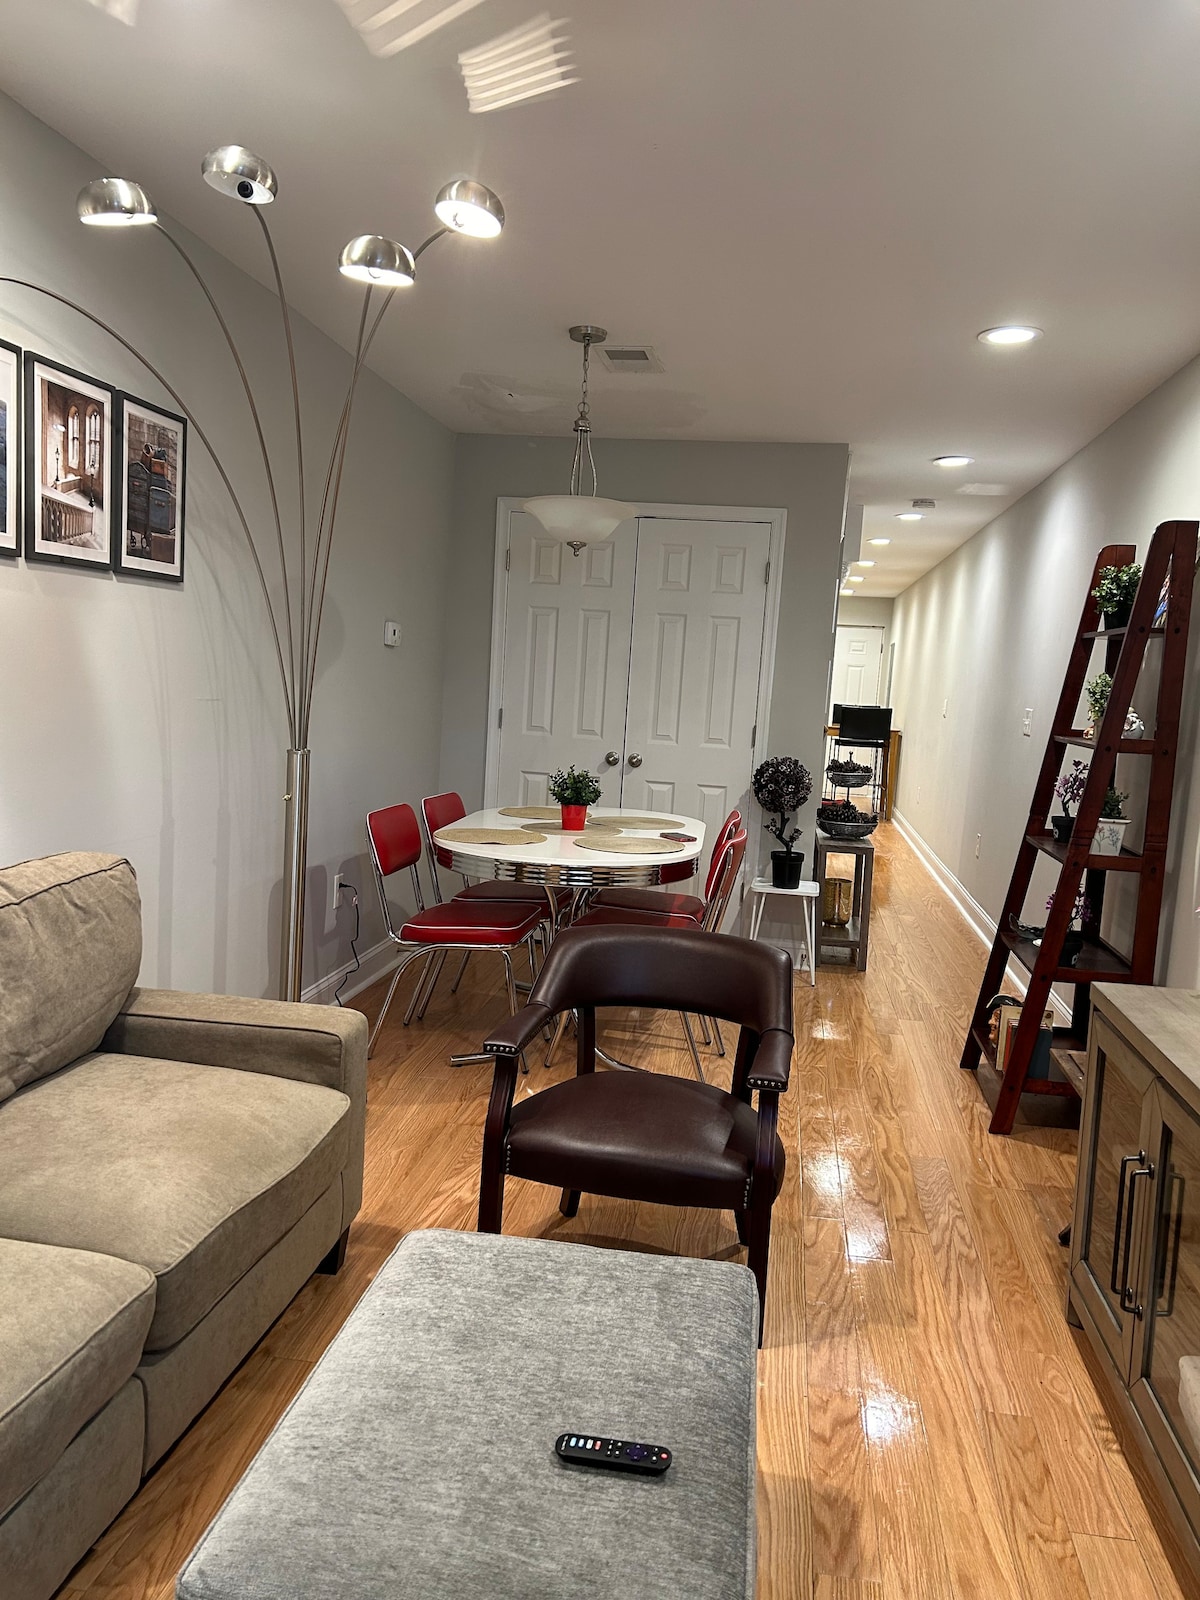 2/2 Rowhome in Highlandtown